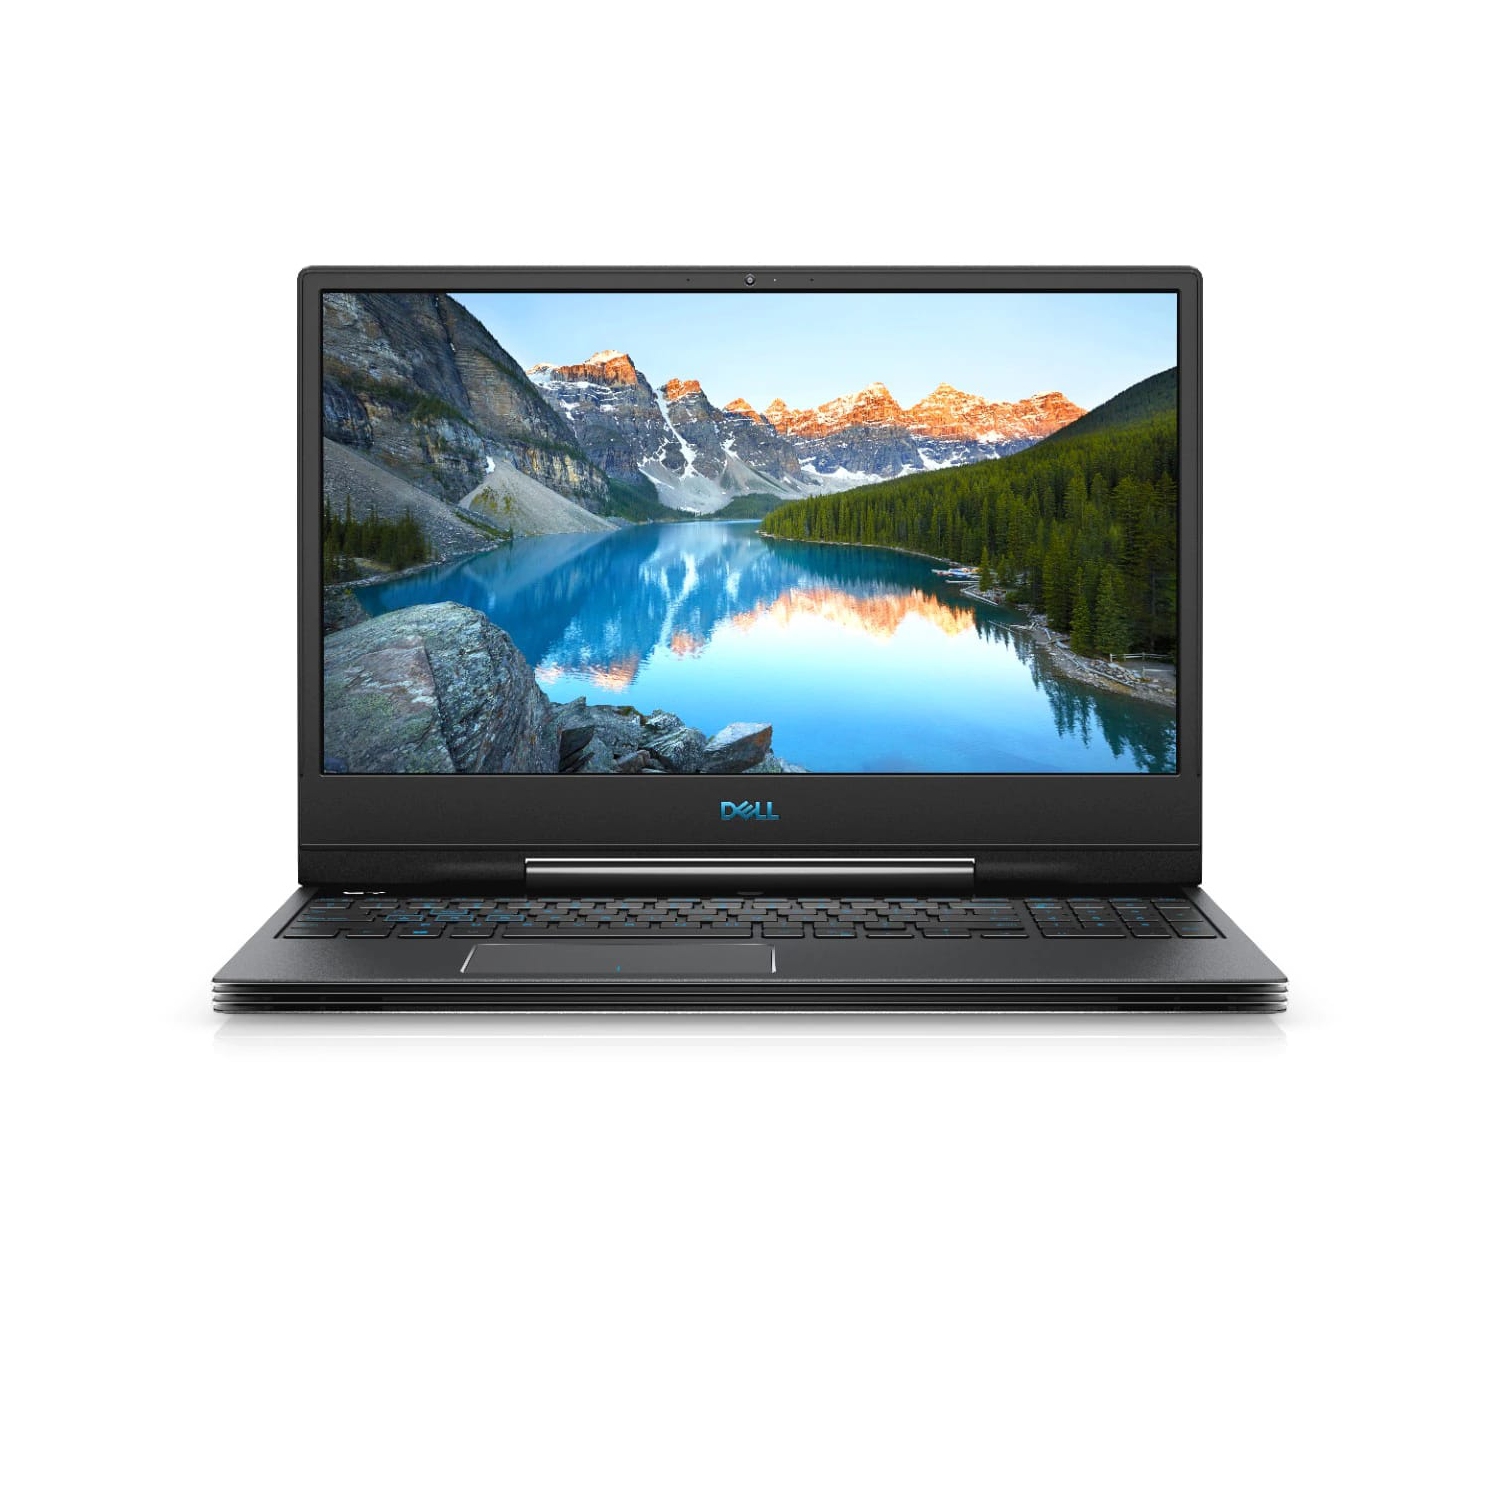 Refurbished (Excellent) – Dell G7 7590 Gaming Laptop (2019) | 15.6" 4K | Core i7 - 512GB SSD - 16GB RAM | 6 Cores @ 4.5 GHz